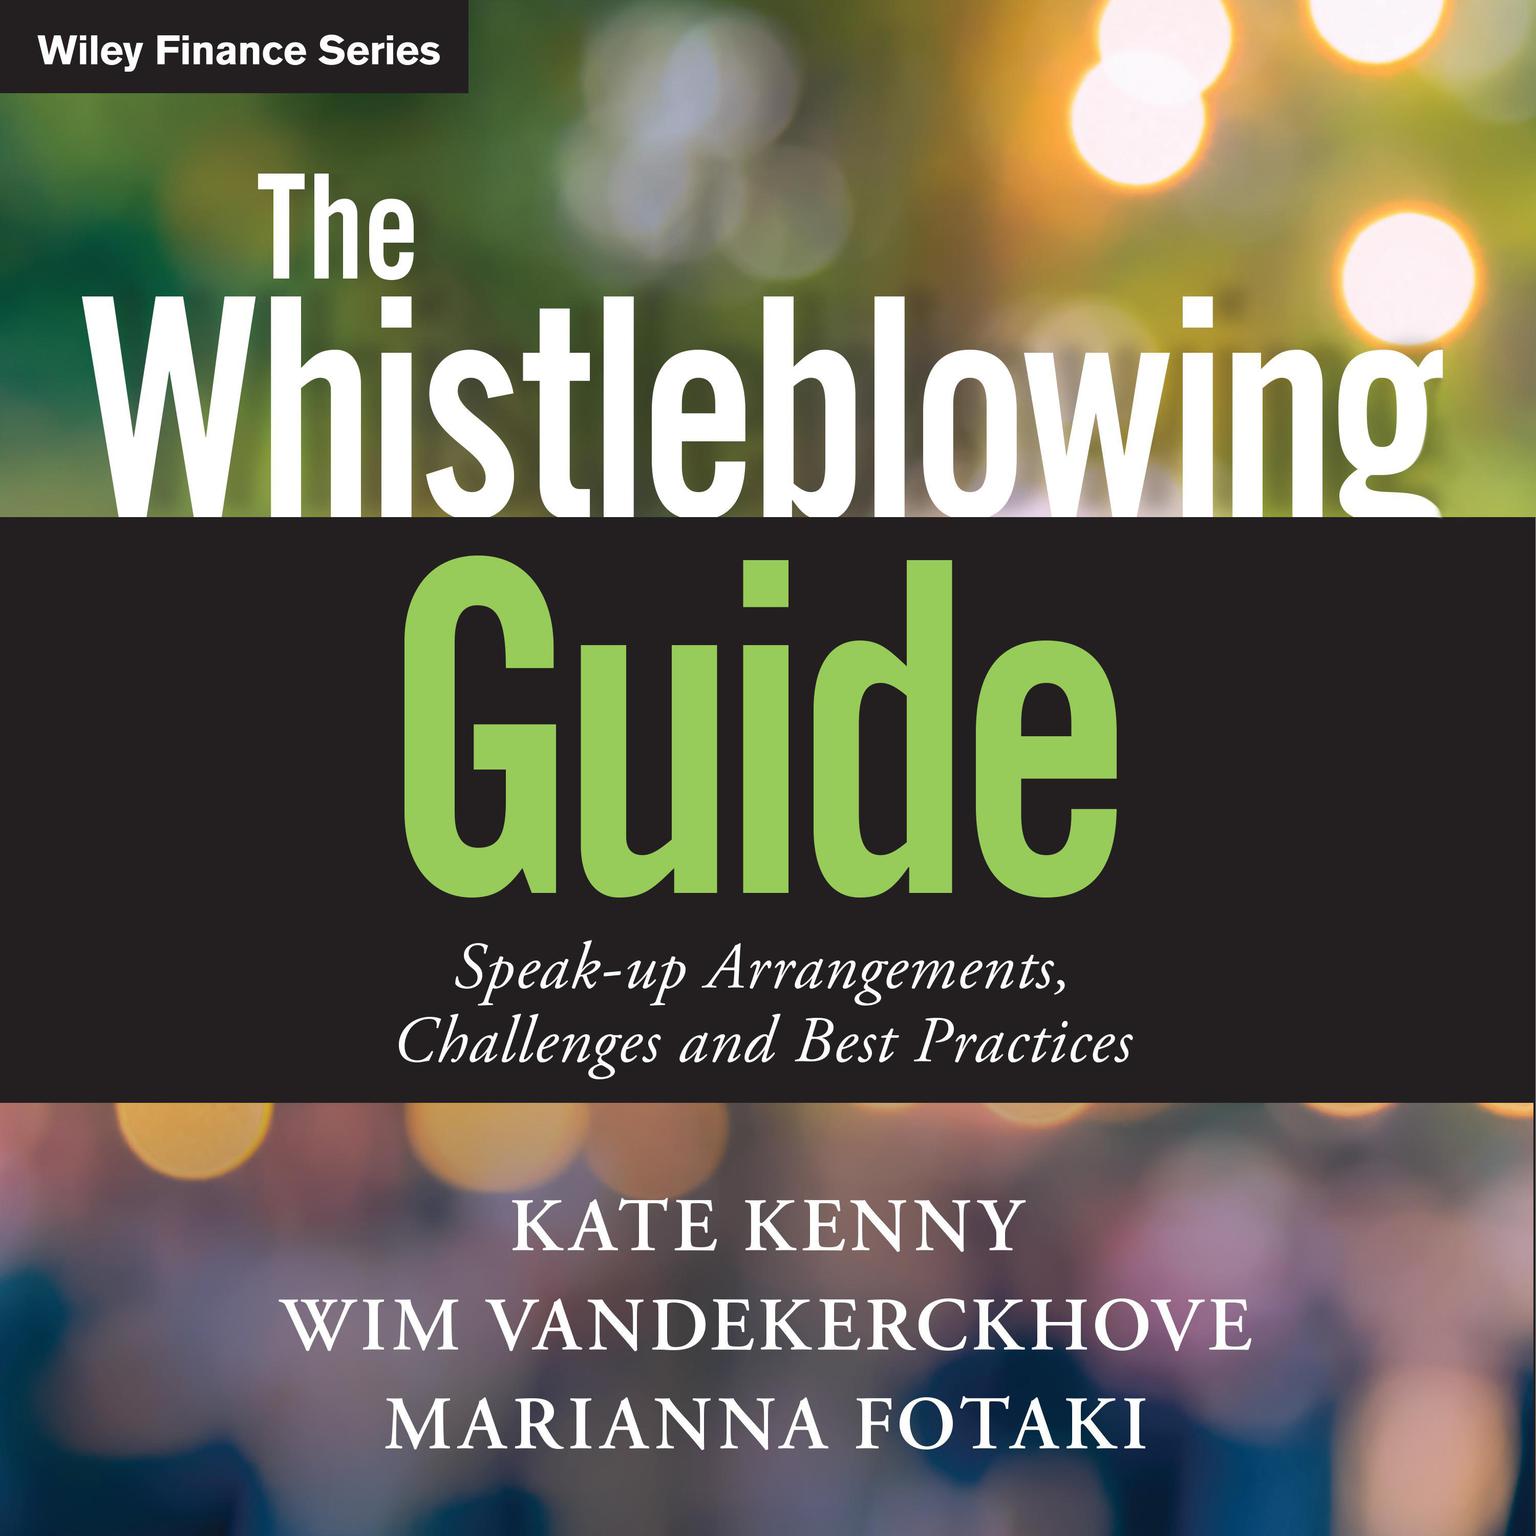 The Whistleblowing Guide: Speak-up Arrangements, Challenges and Best Practices Audiobook, by Kate Kenny